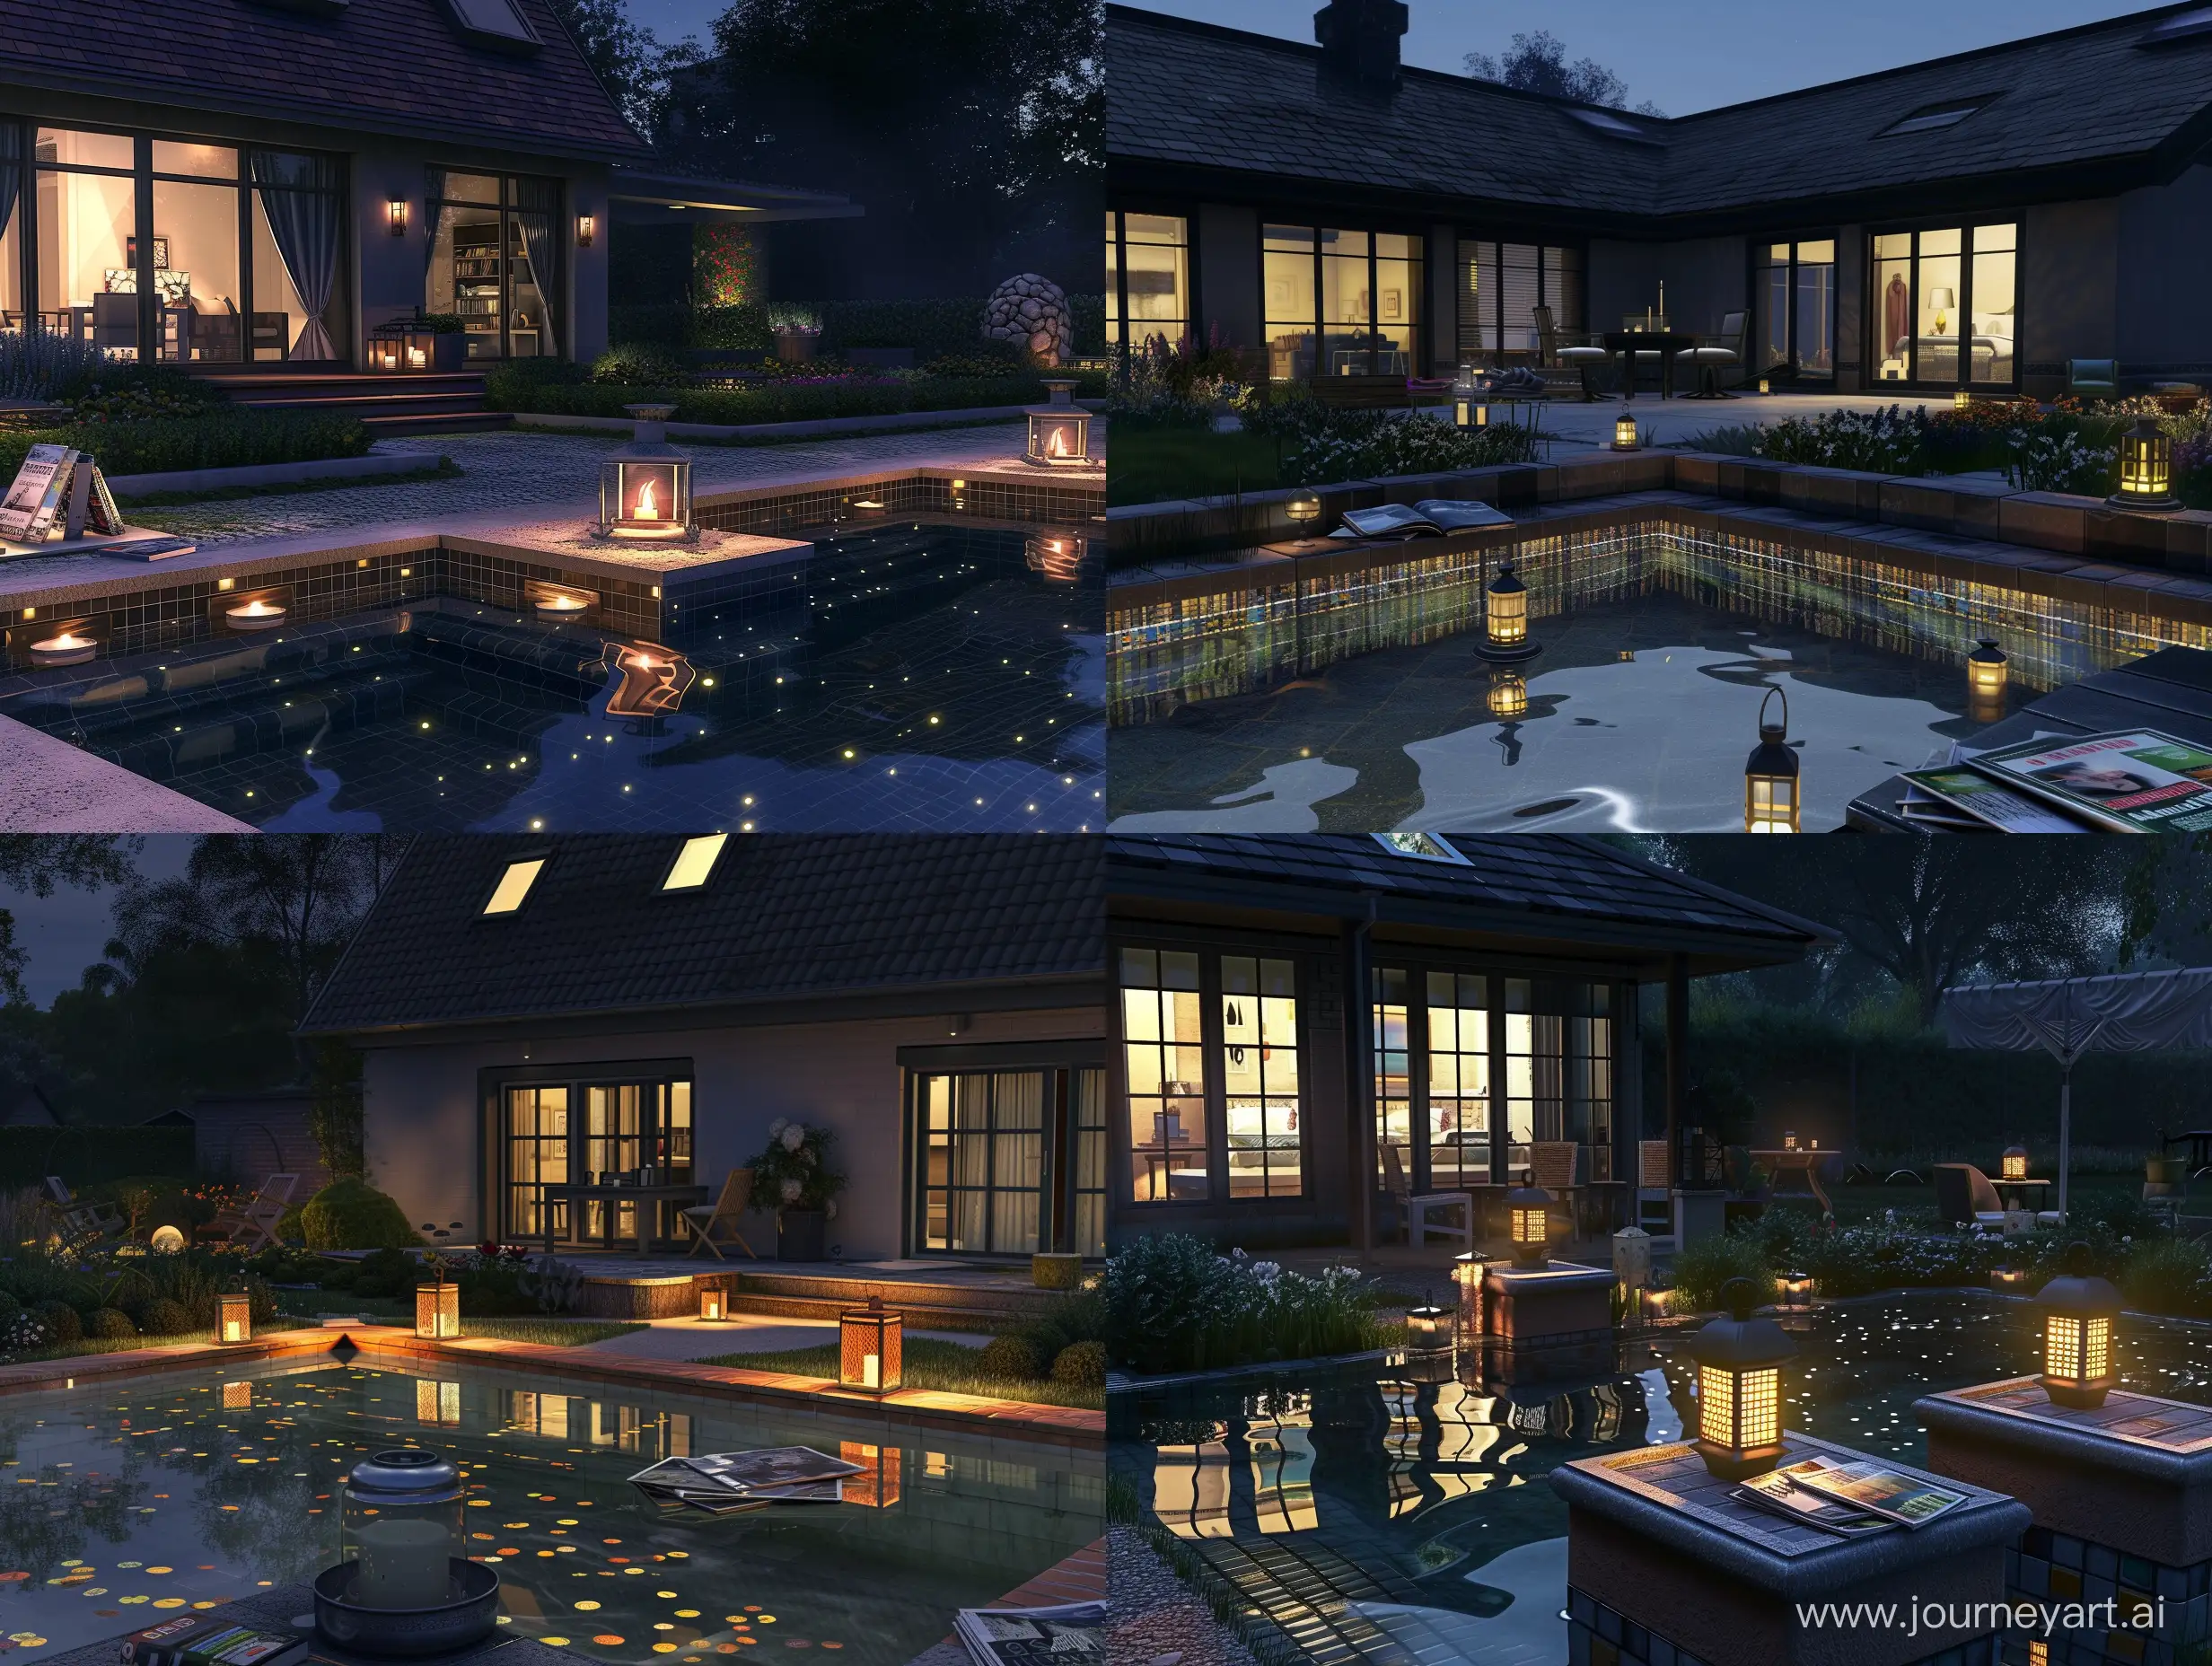 beautiful american style house with a roof, and windows, at night. a backyard with gardens, and small swimming pool, with edging and small tiled steps. modern lanterns reflecting in the transparent water. near is a little table with magazines and candles. there are two chairs near the table. 8 to ultrarealism, unreal engine, clear objects, beautiful night skies